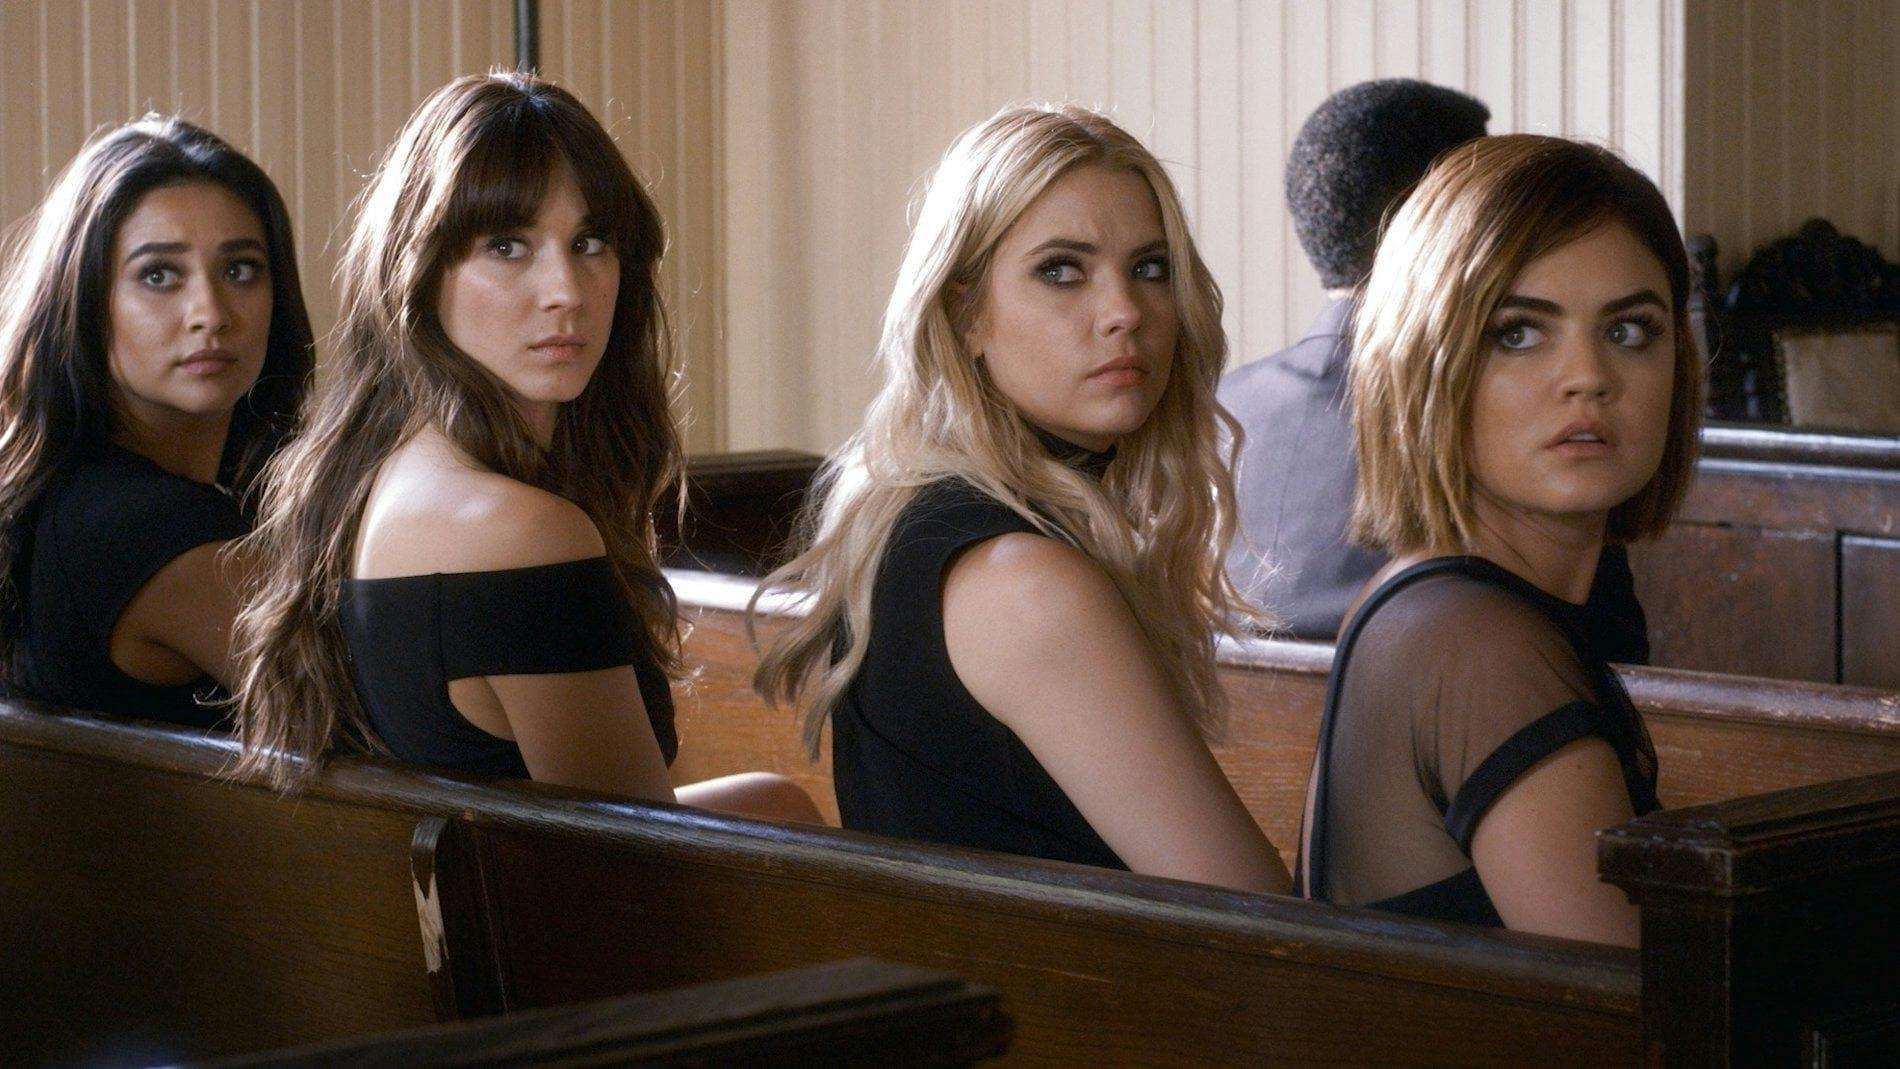 Shay Mitchell, Troian Bellisario, Ashley Benson, and Lucy Hale sit in a church pew on set of 'Pretty Little Liars.'